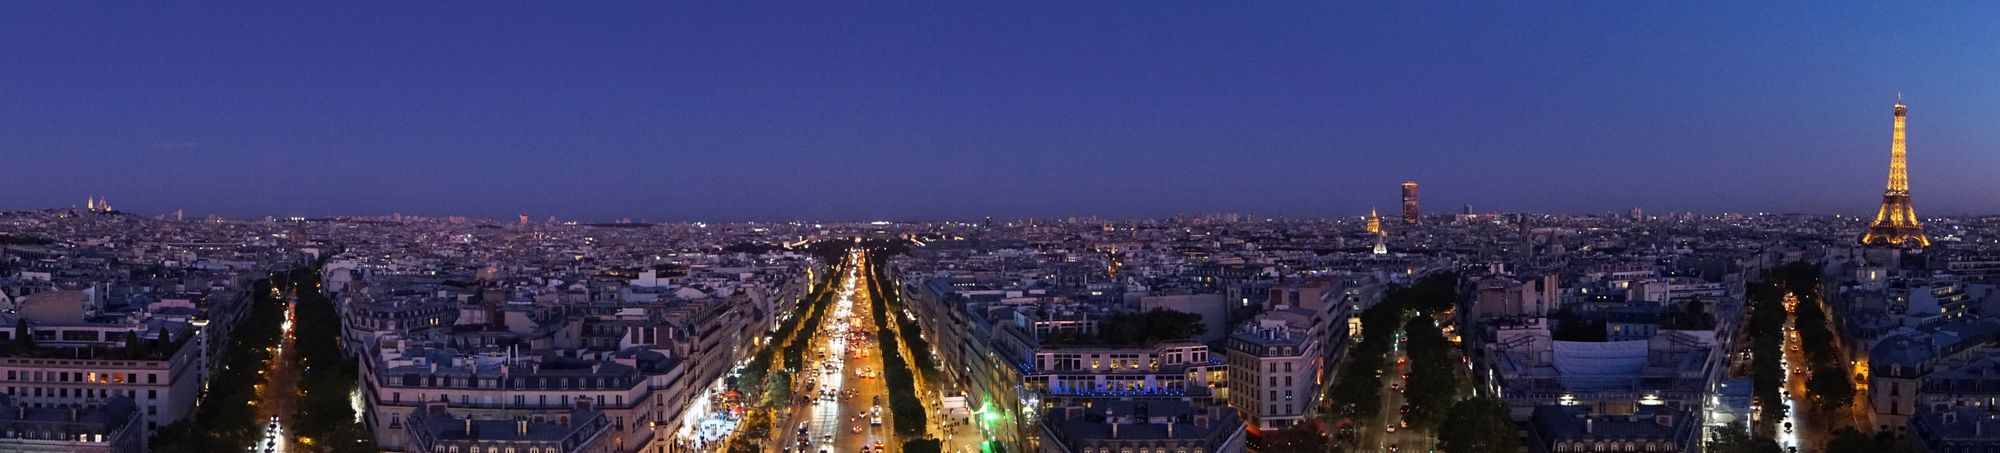 An aerial view of Paris at night from the top of the Arc de Triomphe.